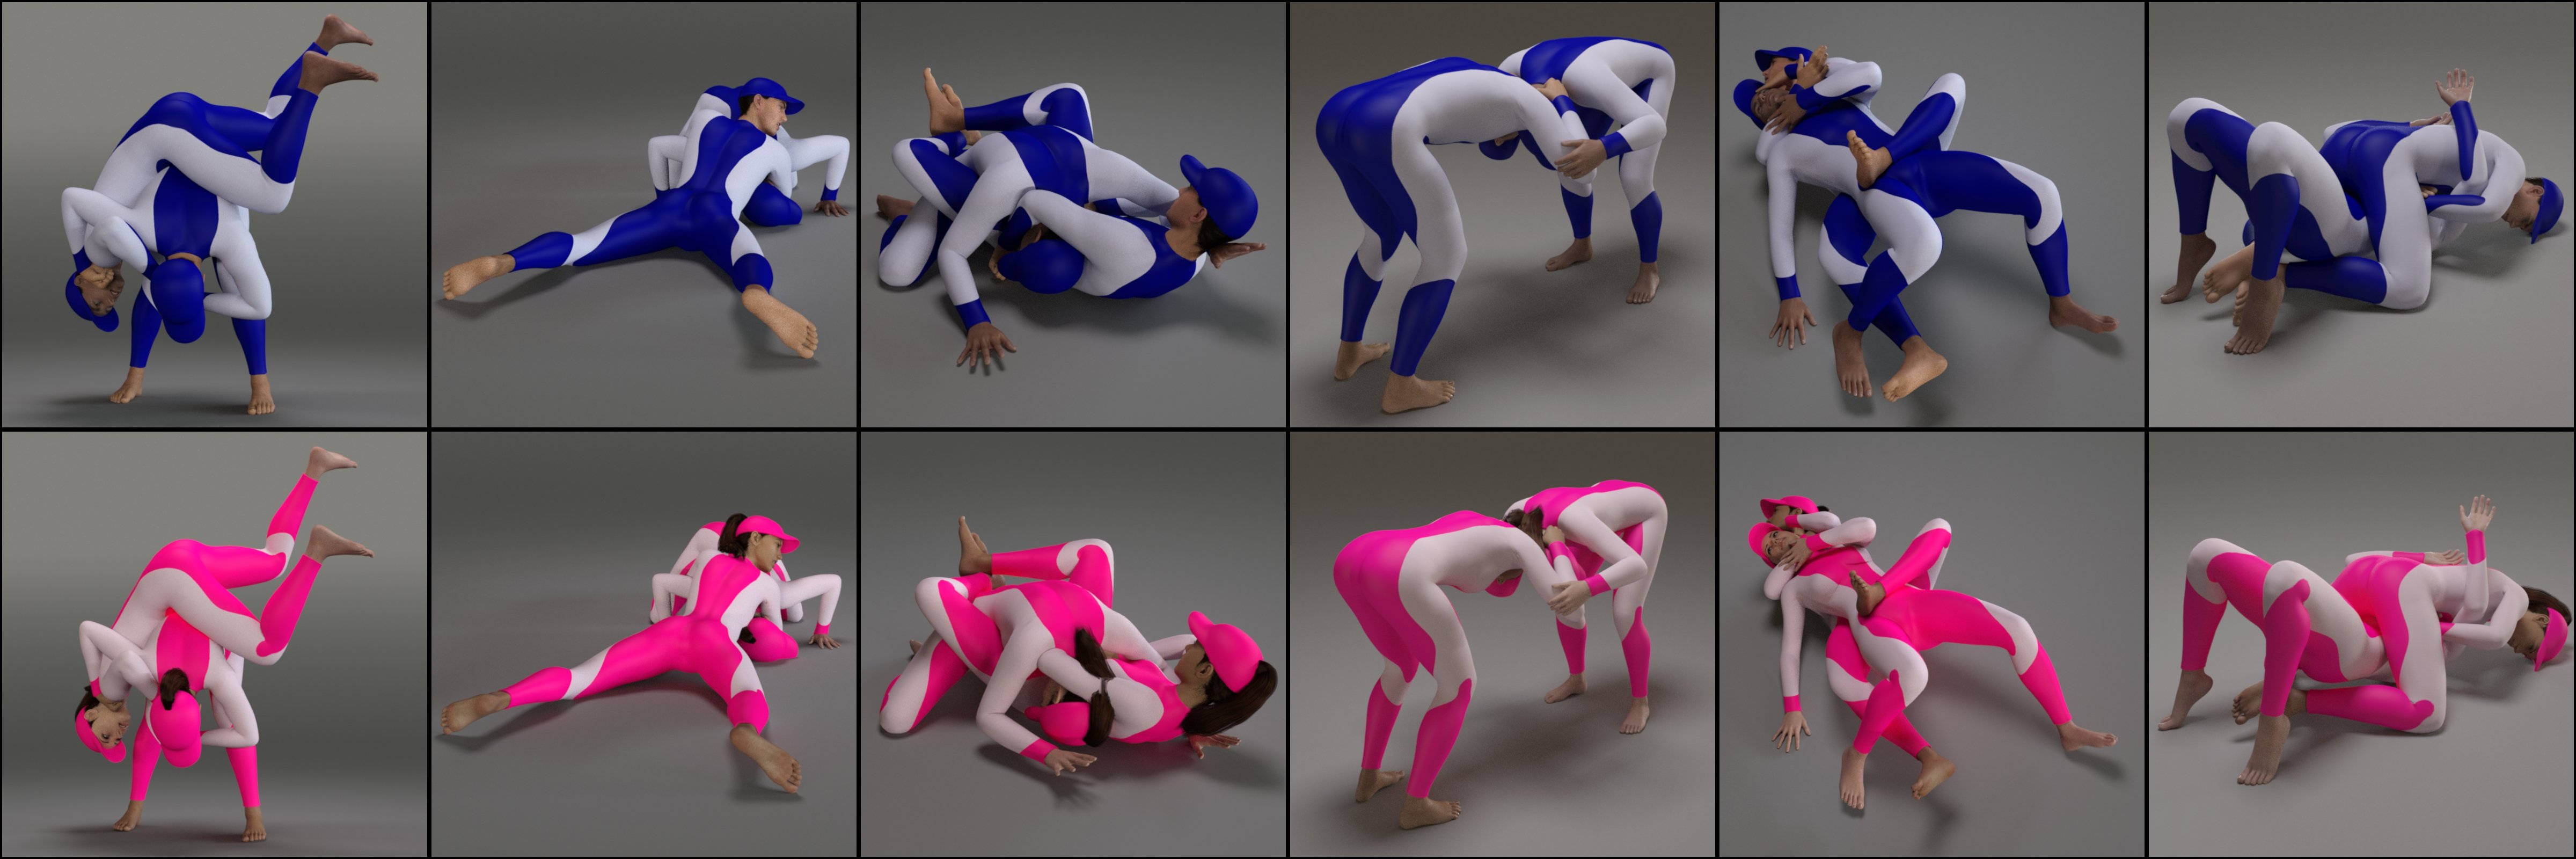 Grappling Poses Volume 1 for Genesis 8 and 8.1 Male and Female by: atrilliongames, 3D Models by Daz 3D